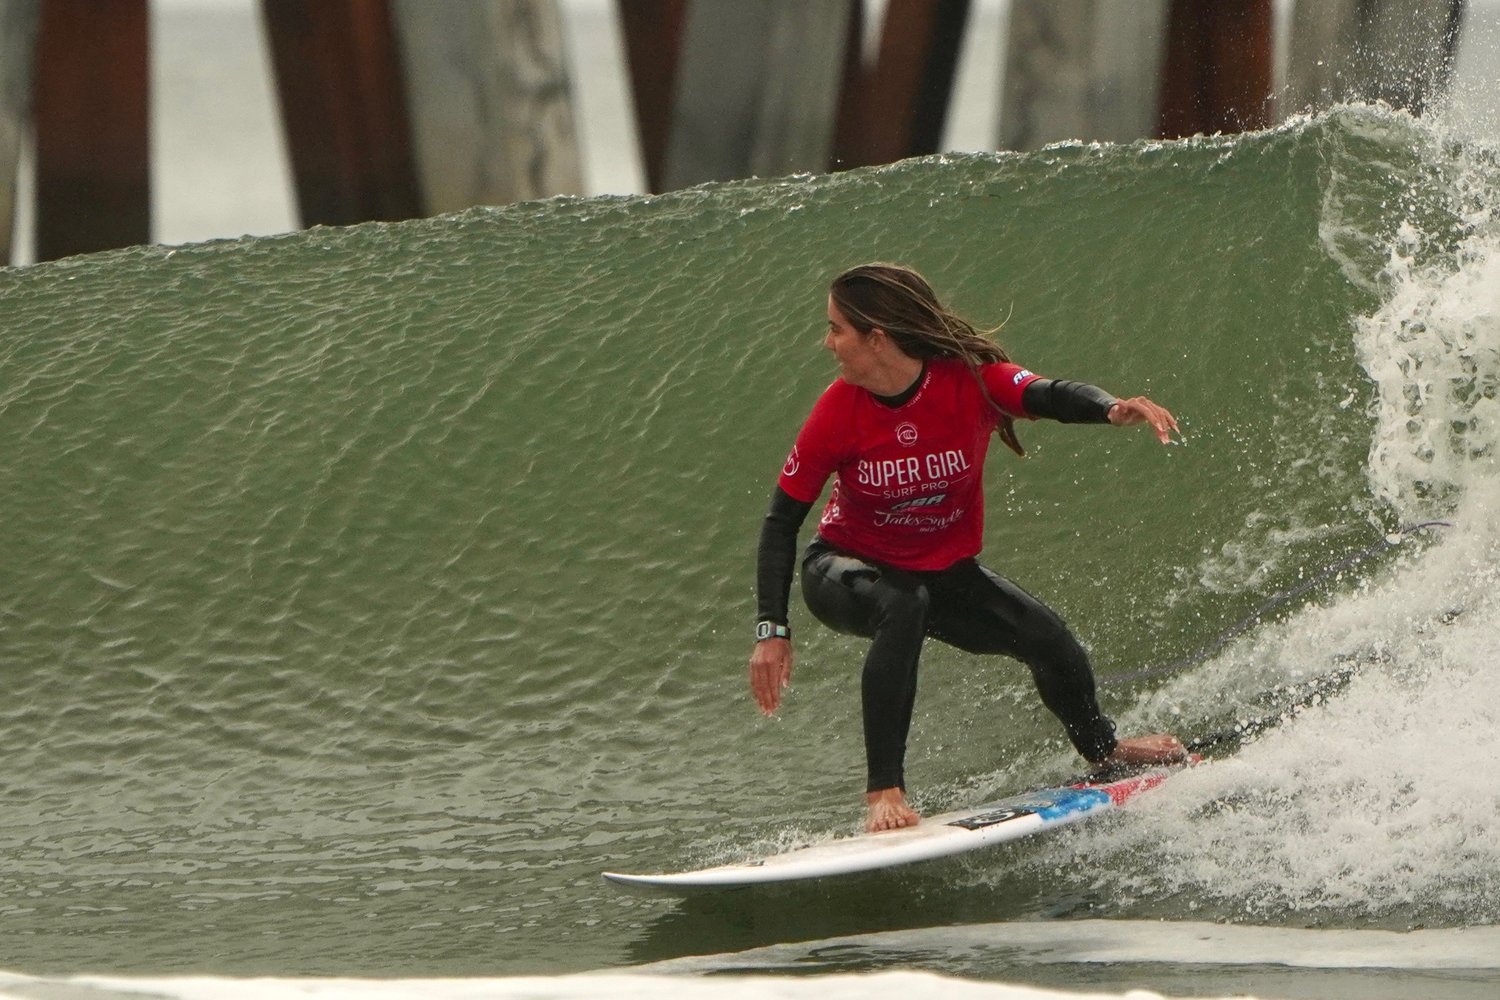 Former Super Girl champions Caroline Marks rides a wave in Jacksonville Beach during 2021’s competition.